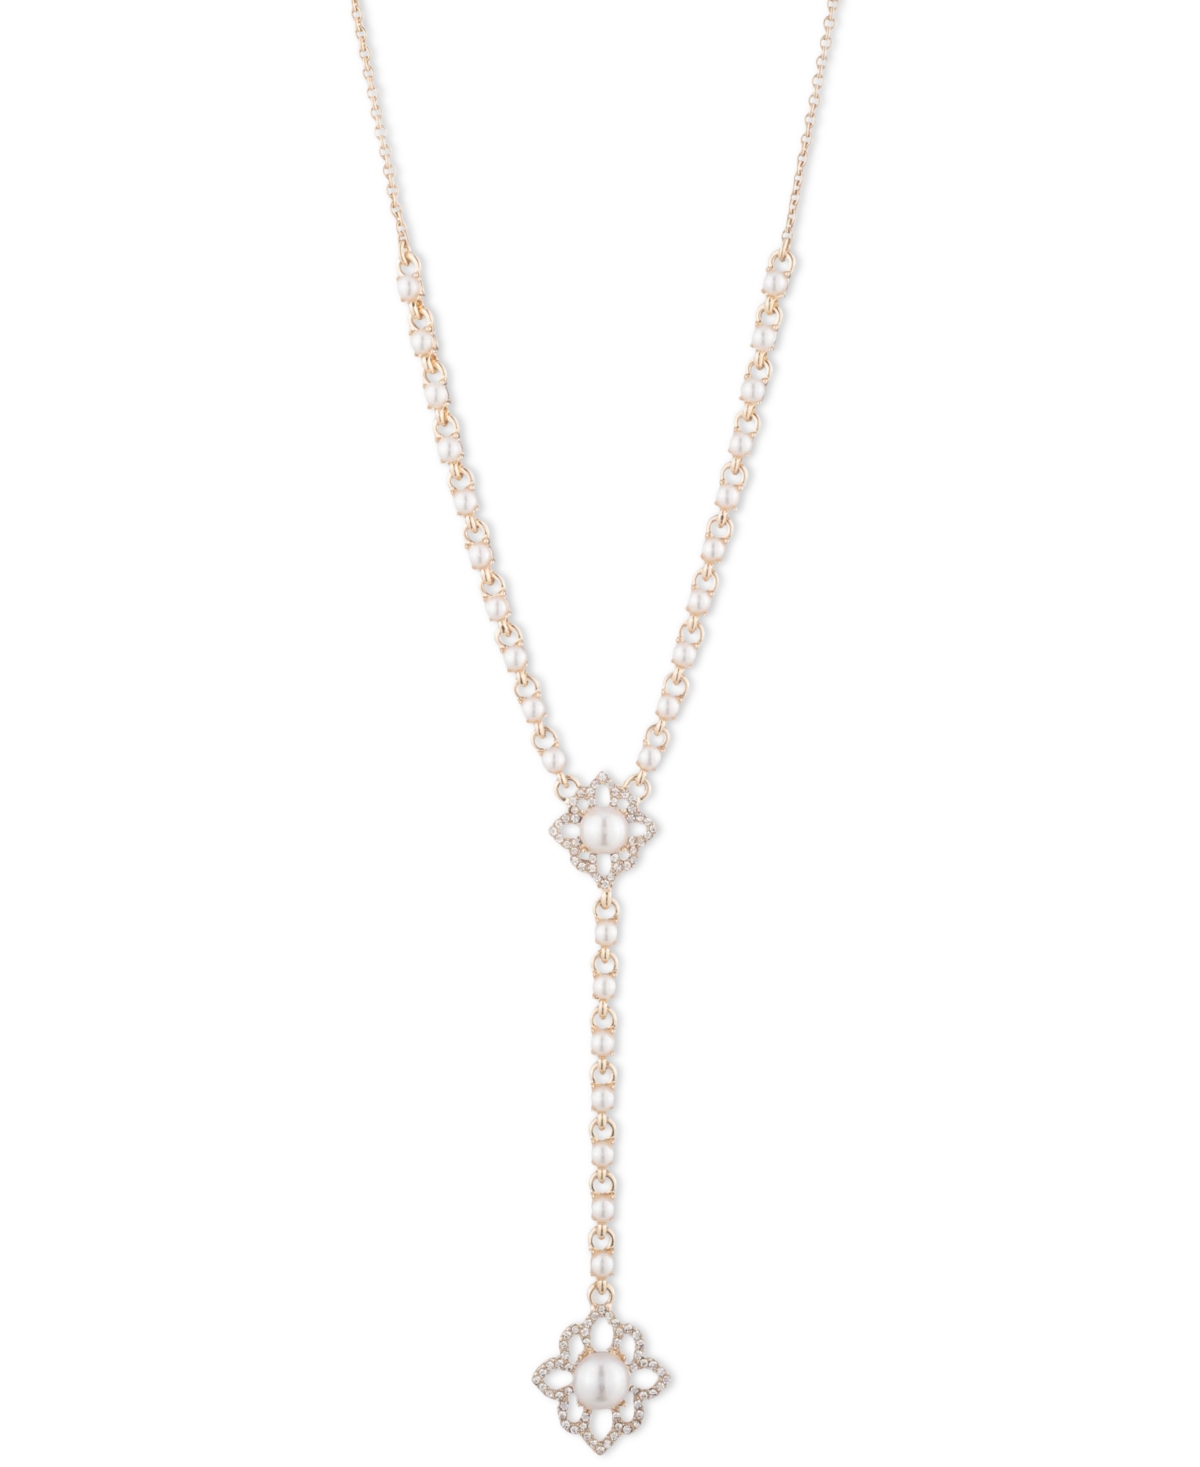 MARCHESA GOLD-TONE PAVE & IMITATION PEARL FLOWER LARIAT NECKLACE, 16" + 3" EXTENDER